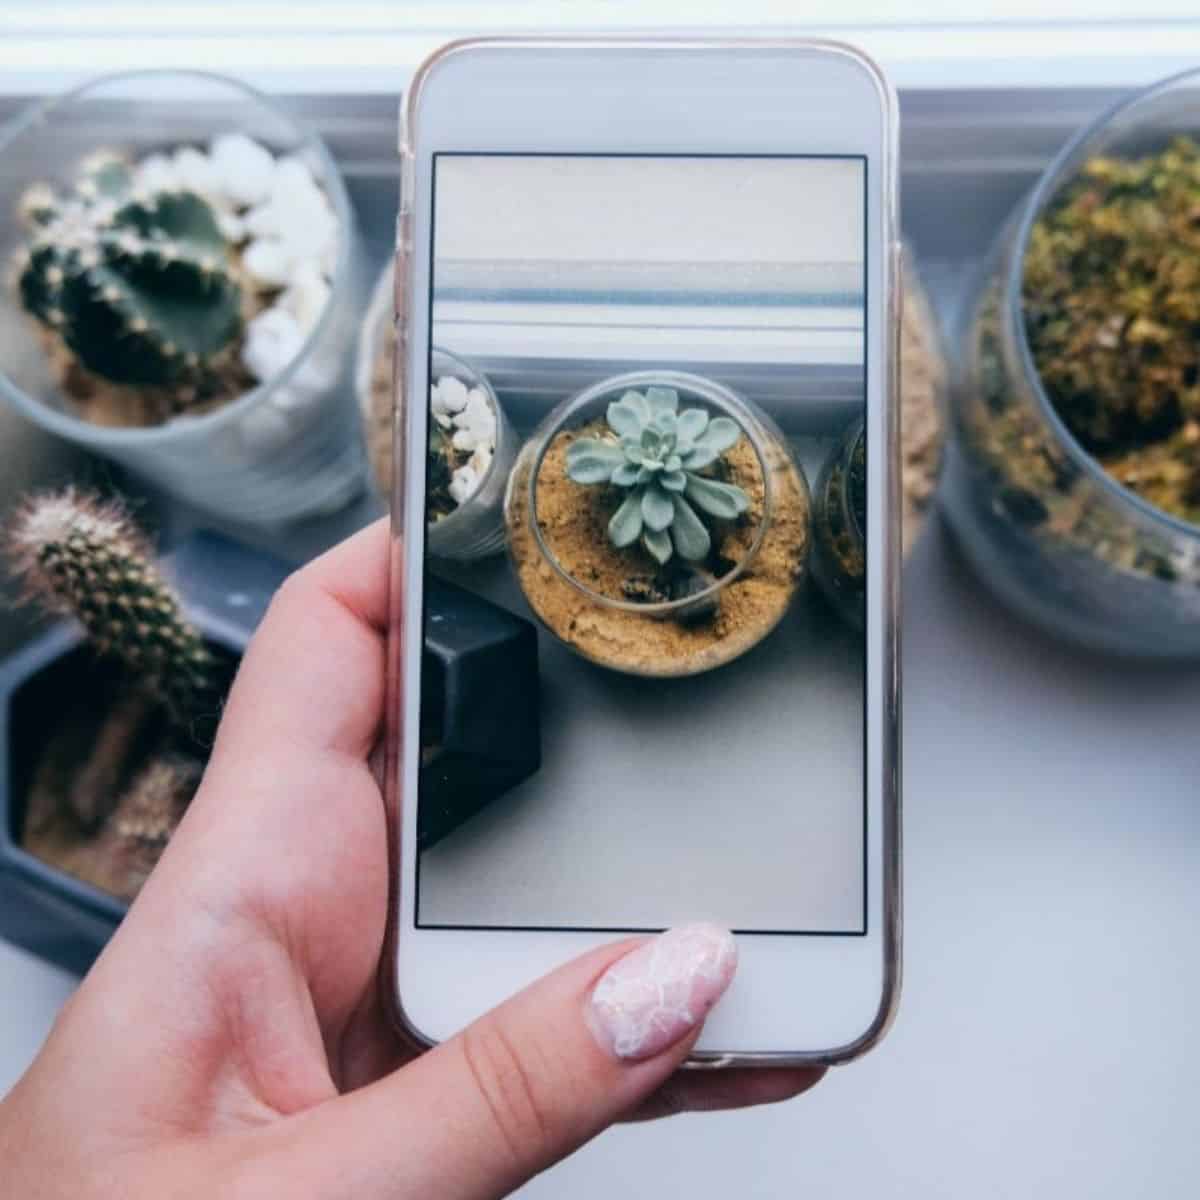 Woman hand holding smart phone over succulents in pots.